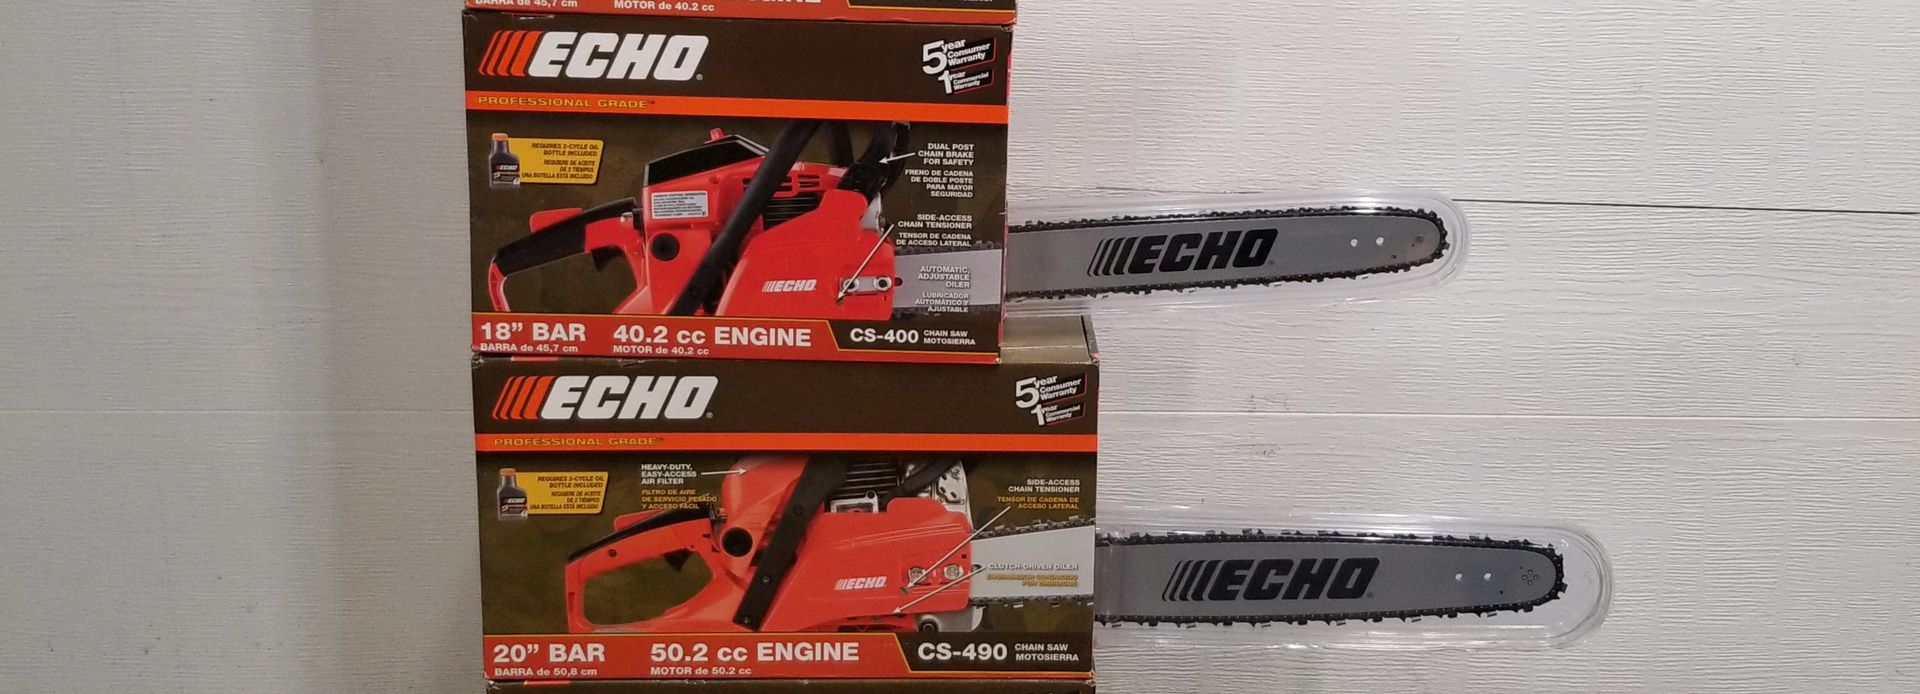 Echo Chainsaw 18inch and 20inch